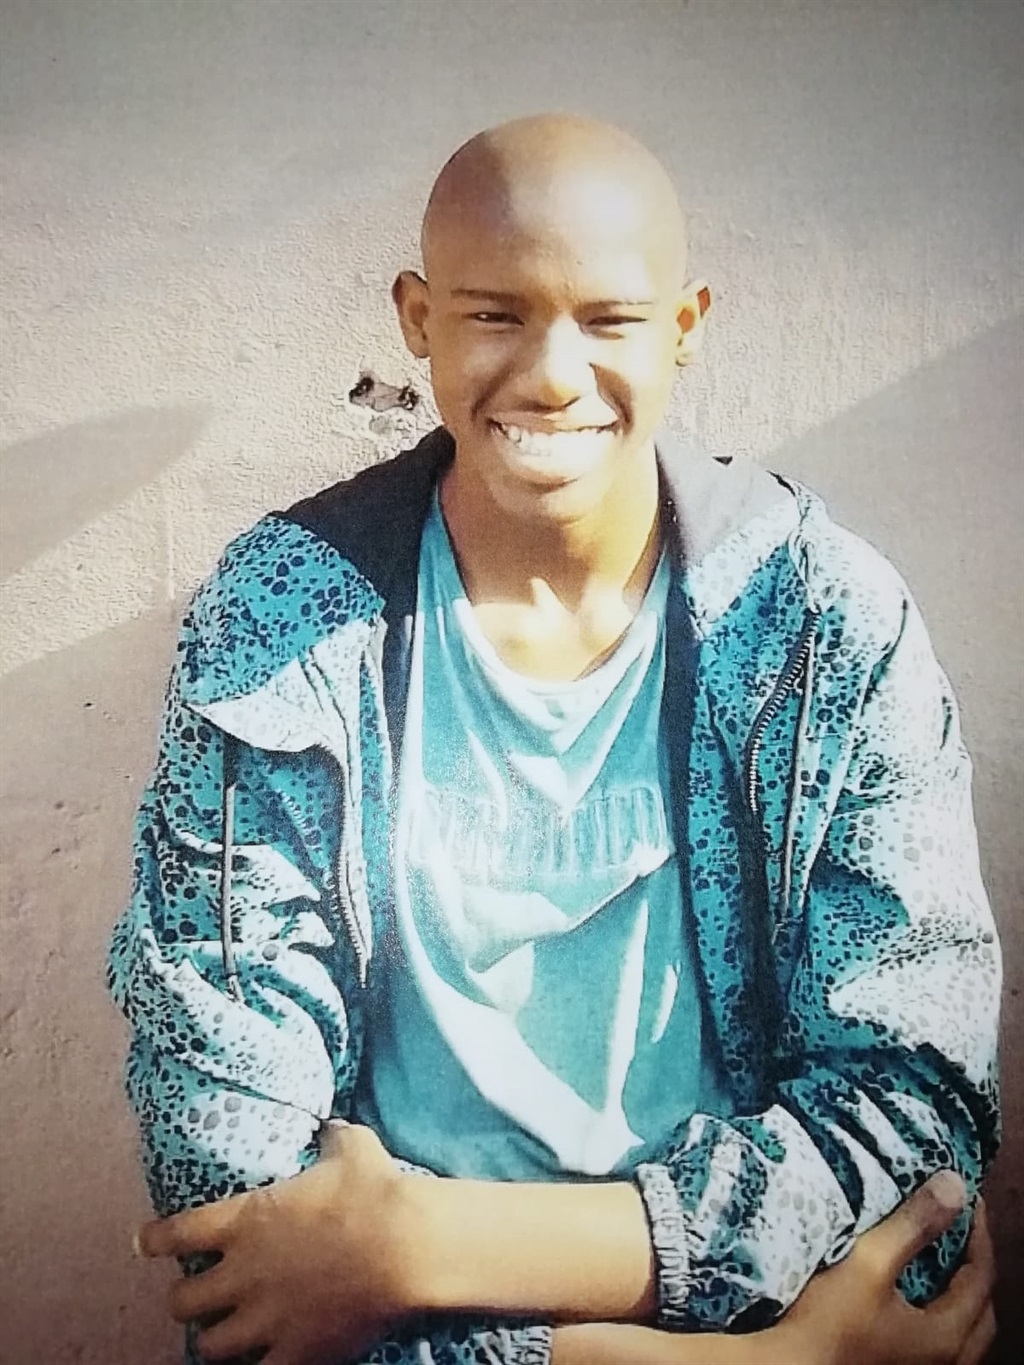 Khaya Buhle Ngqase has been missing since January 8, 2023.